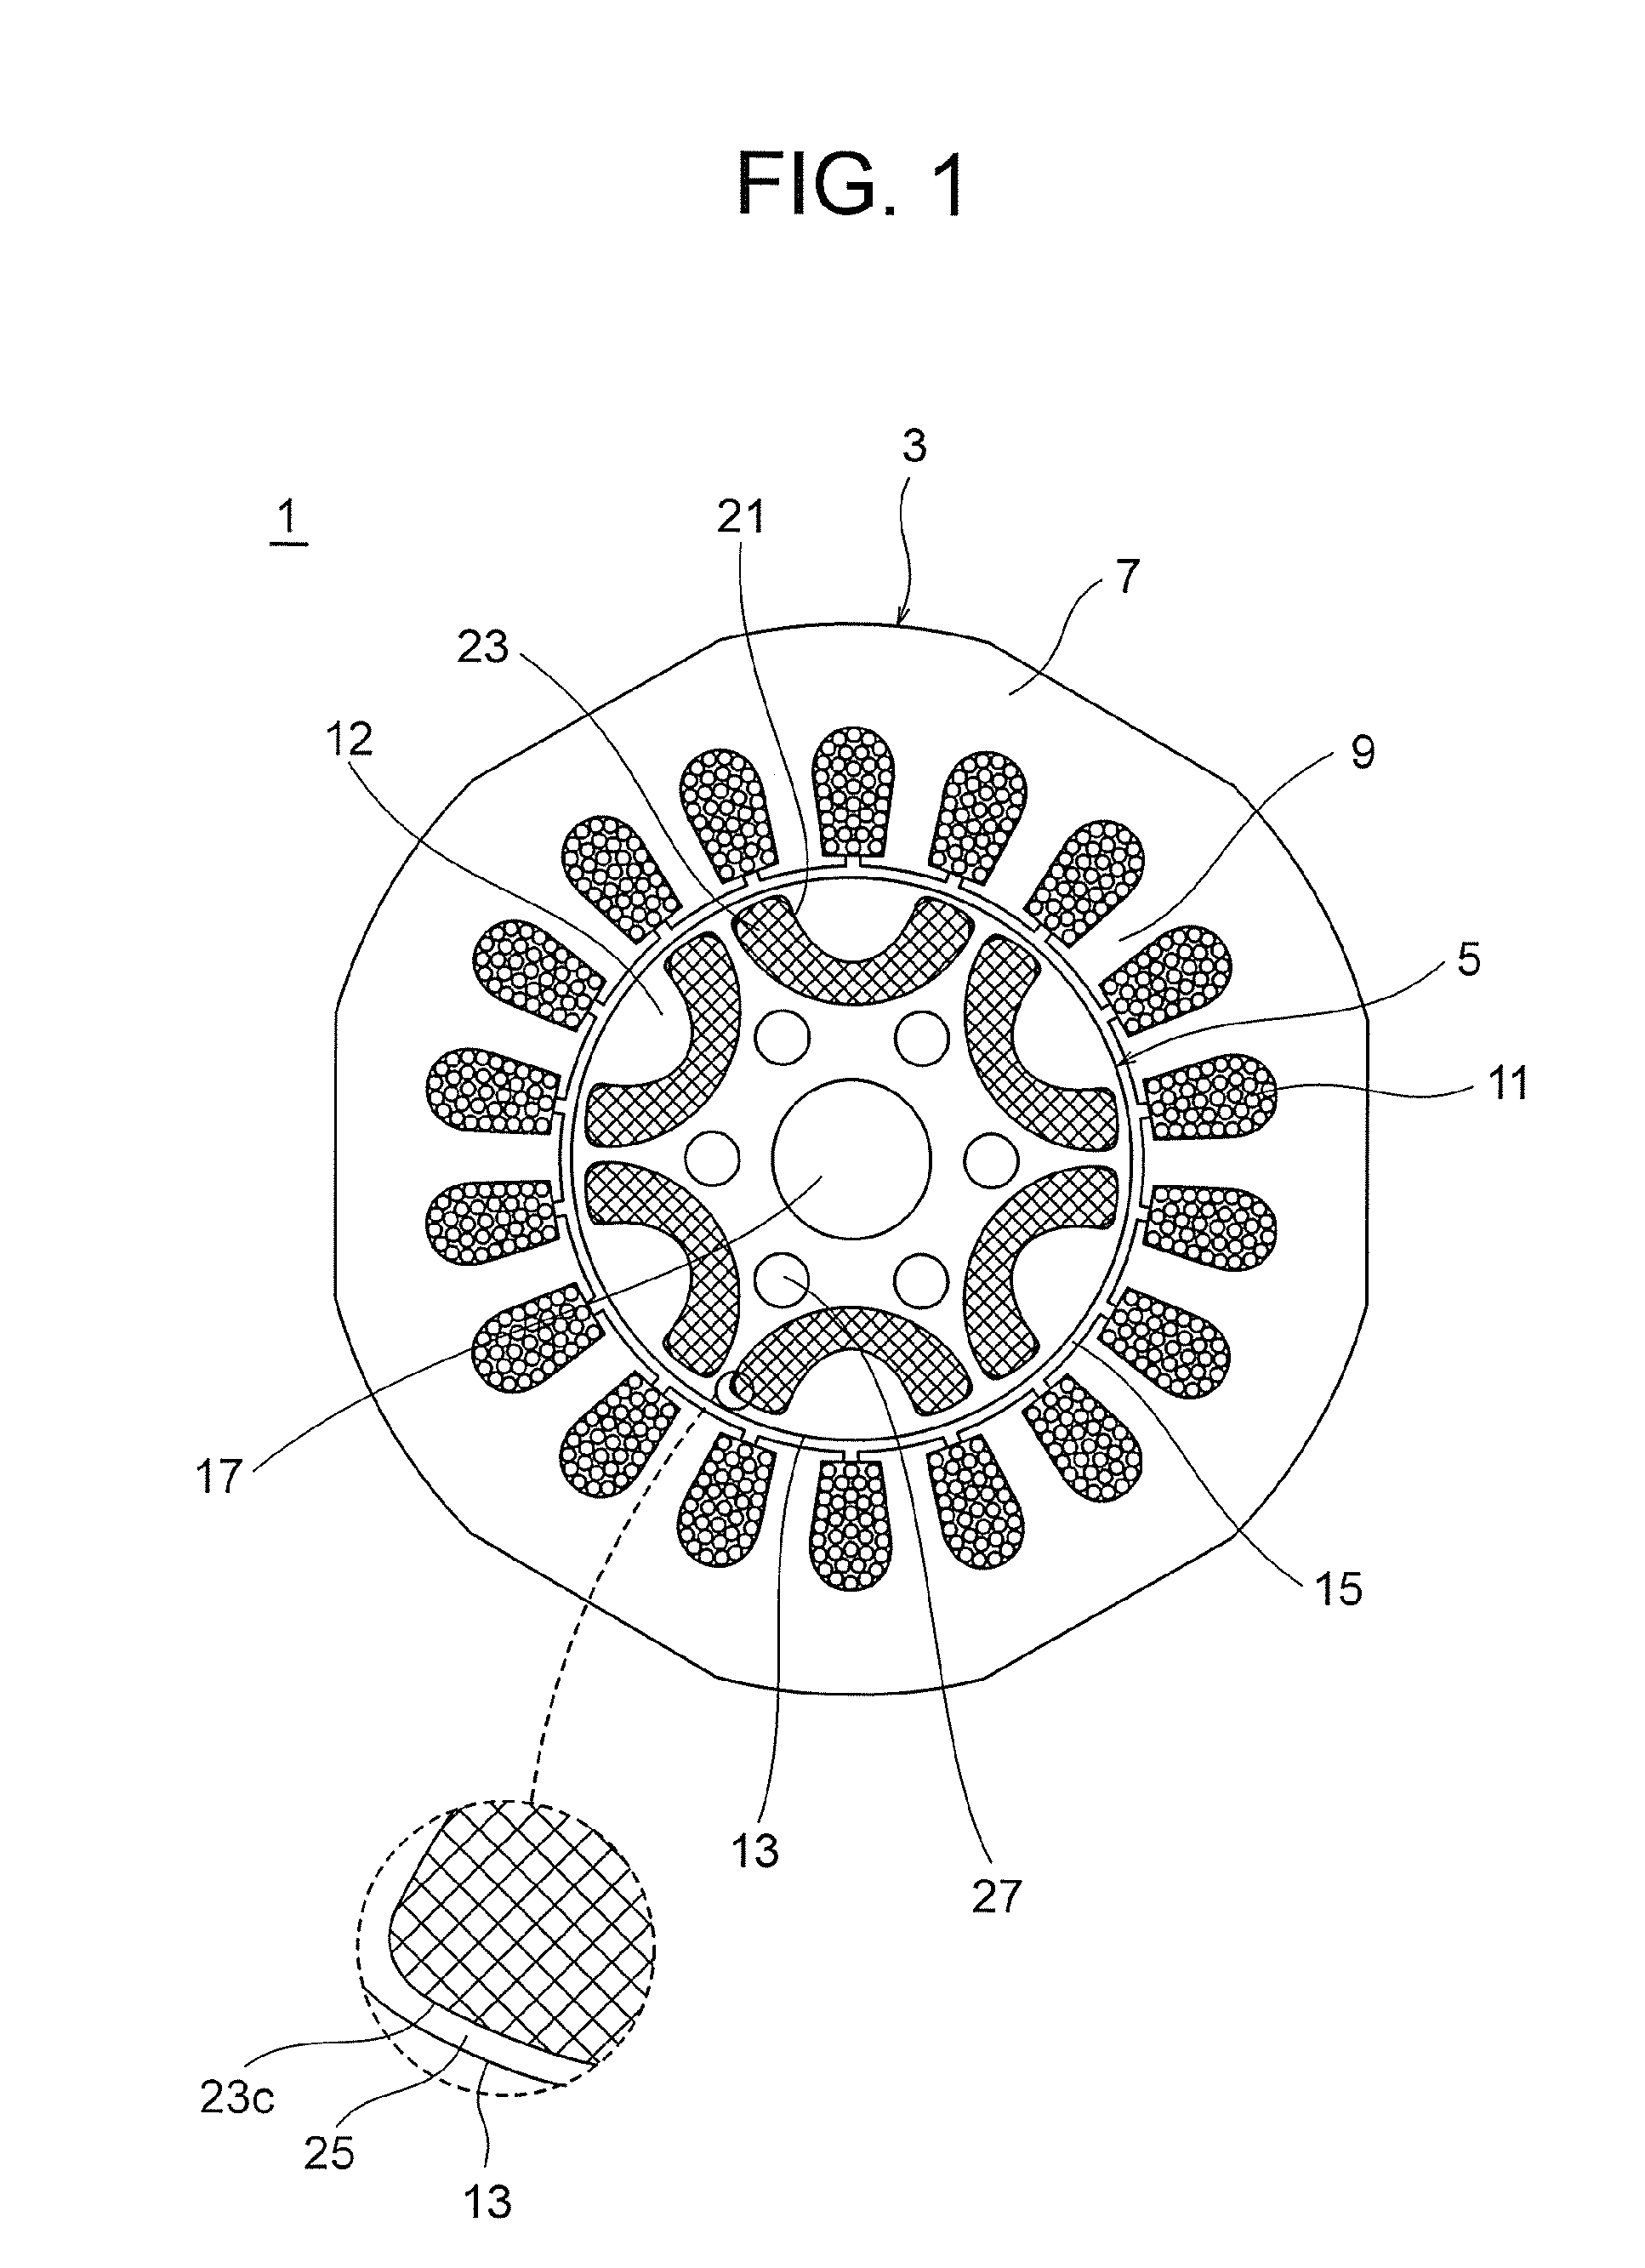 Permanent magnet-embedded electric motor